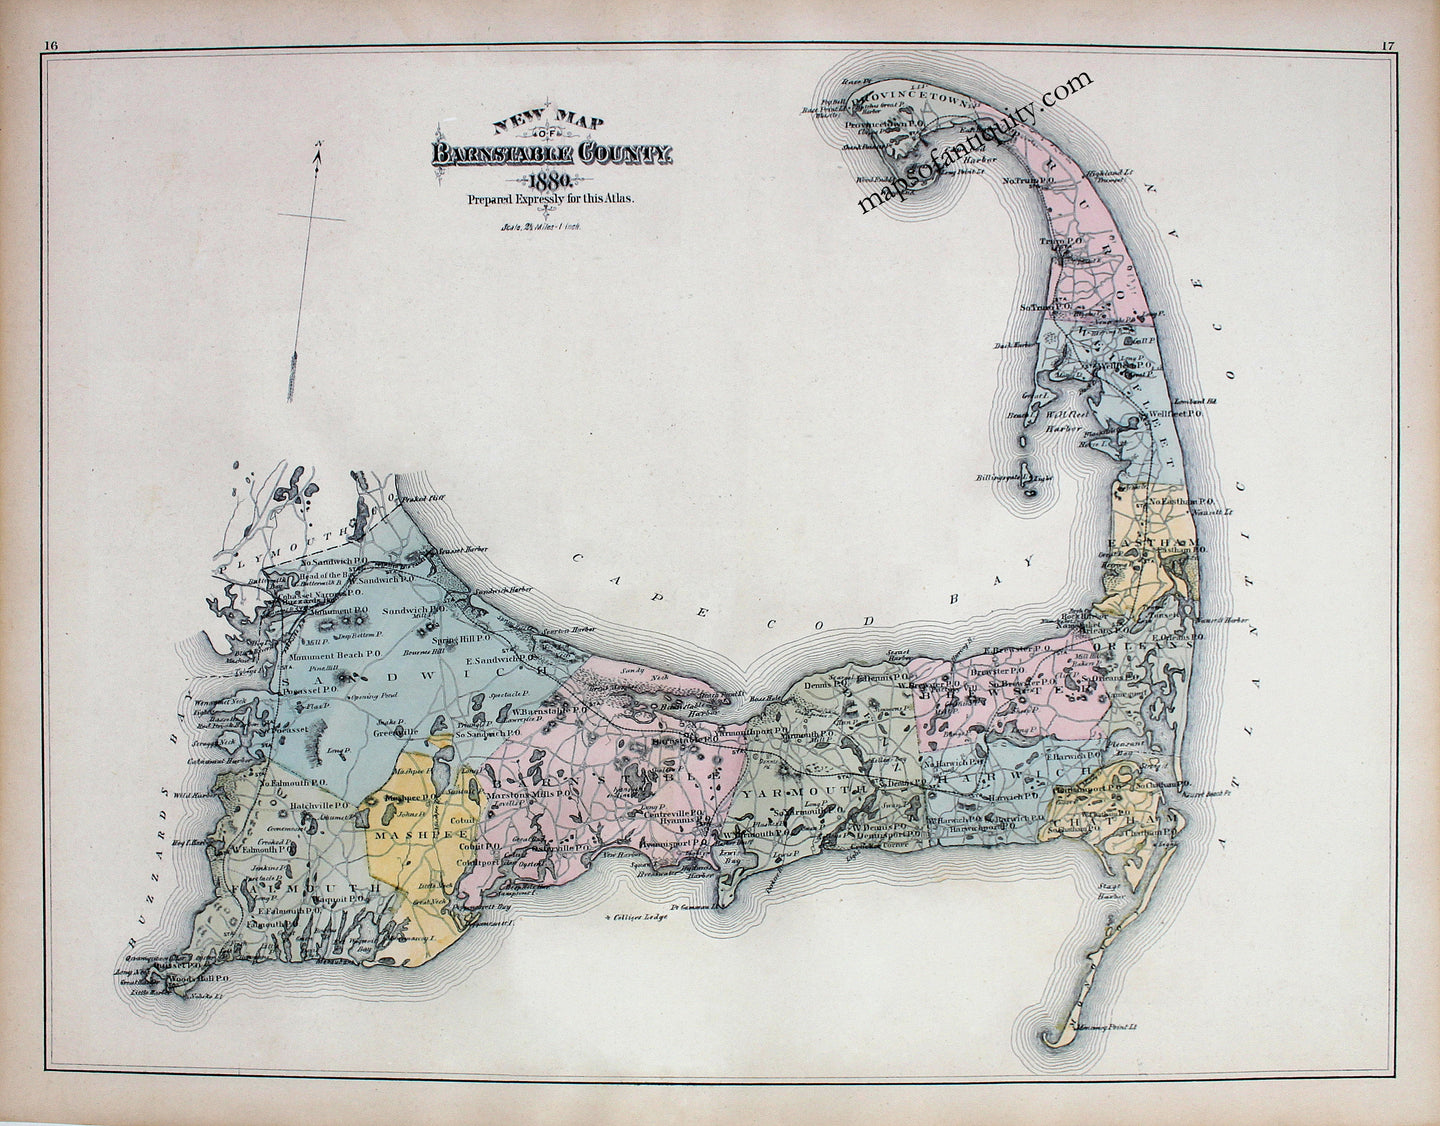 Reproduction-New-Map-of-Barnstable-County-1880-Reproduction-Reproductions-Cape-Cod-and-Islands-Reproduction-Walker-Maps-Of-Antiquity